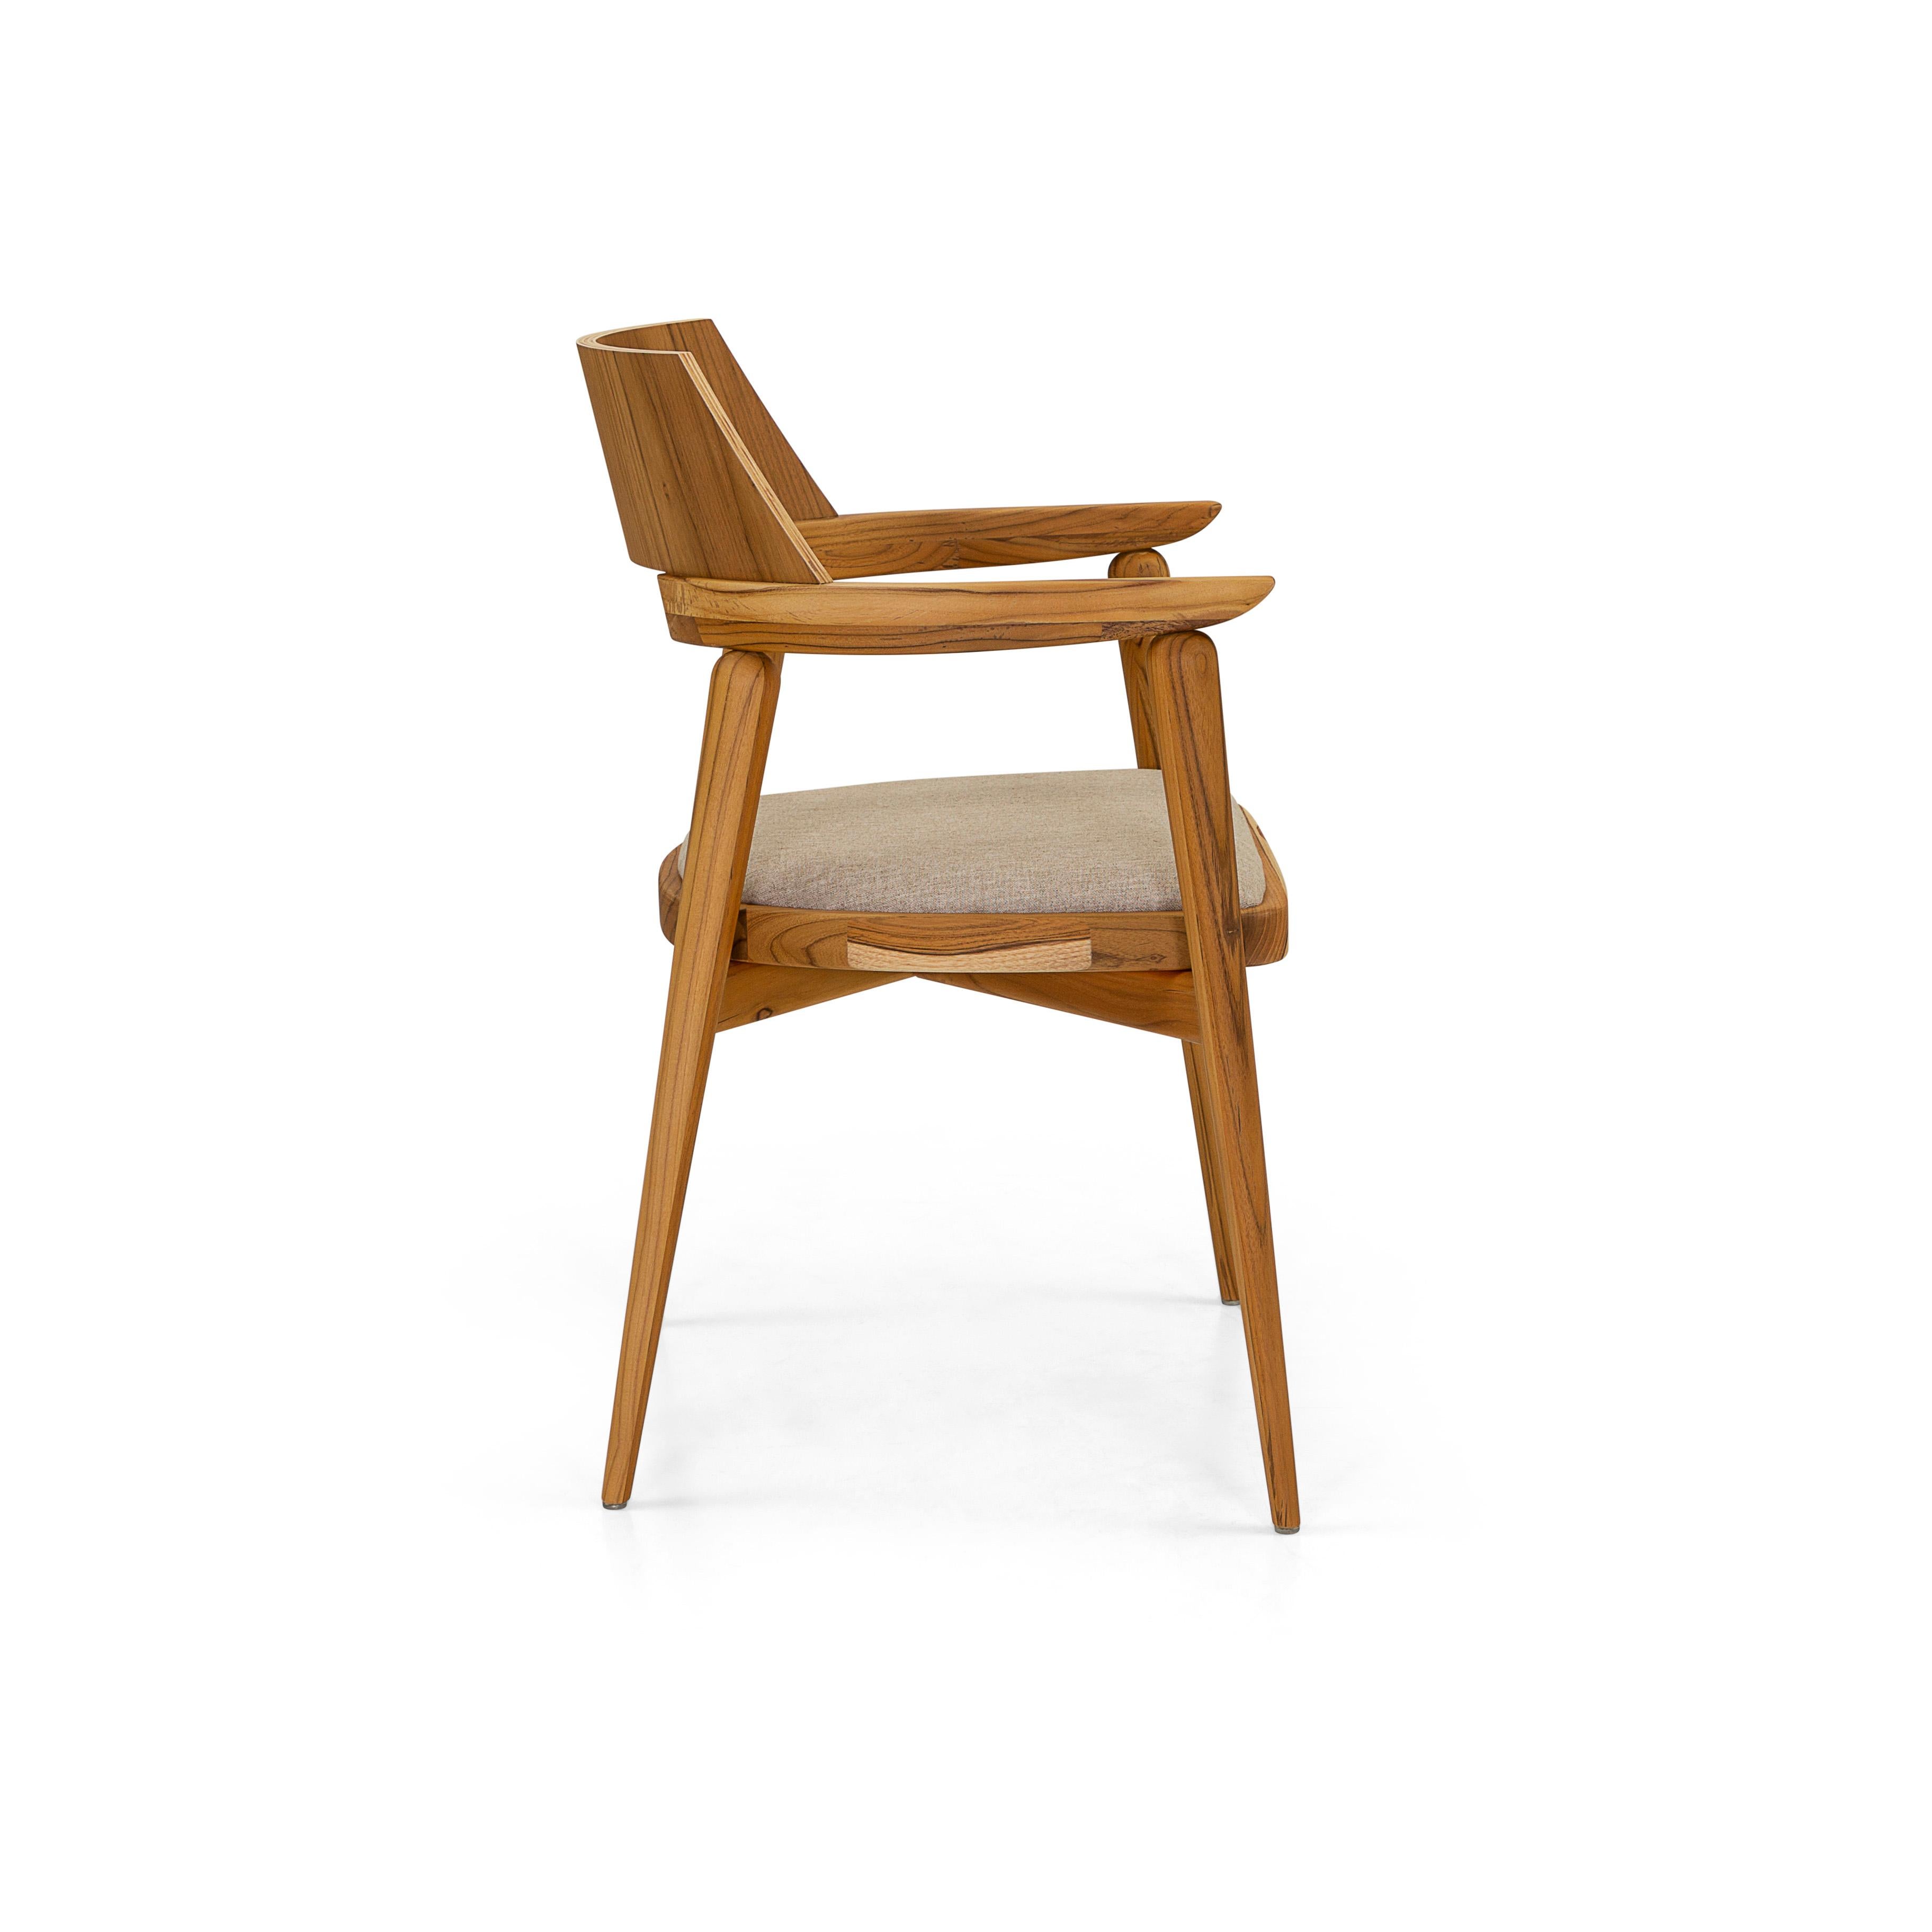 Brazilian Bone Dining Chair / Desk Chair in Teak Wood Finish and Oatmeal Fabric For Sale